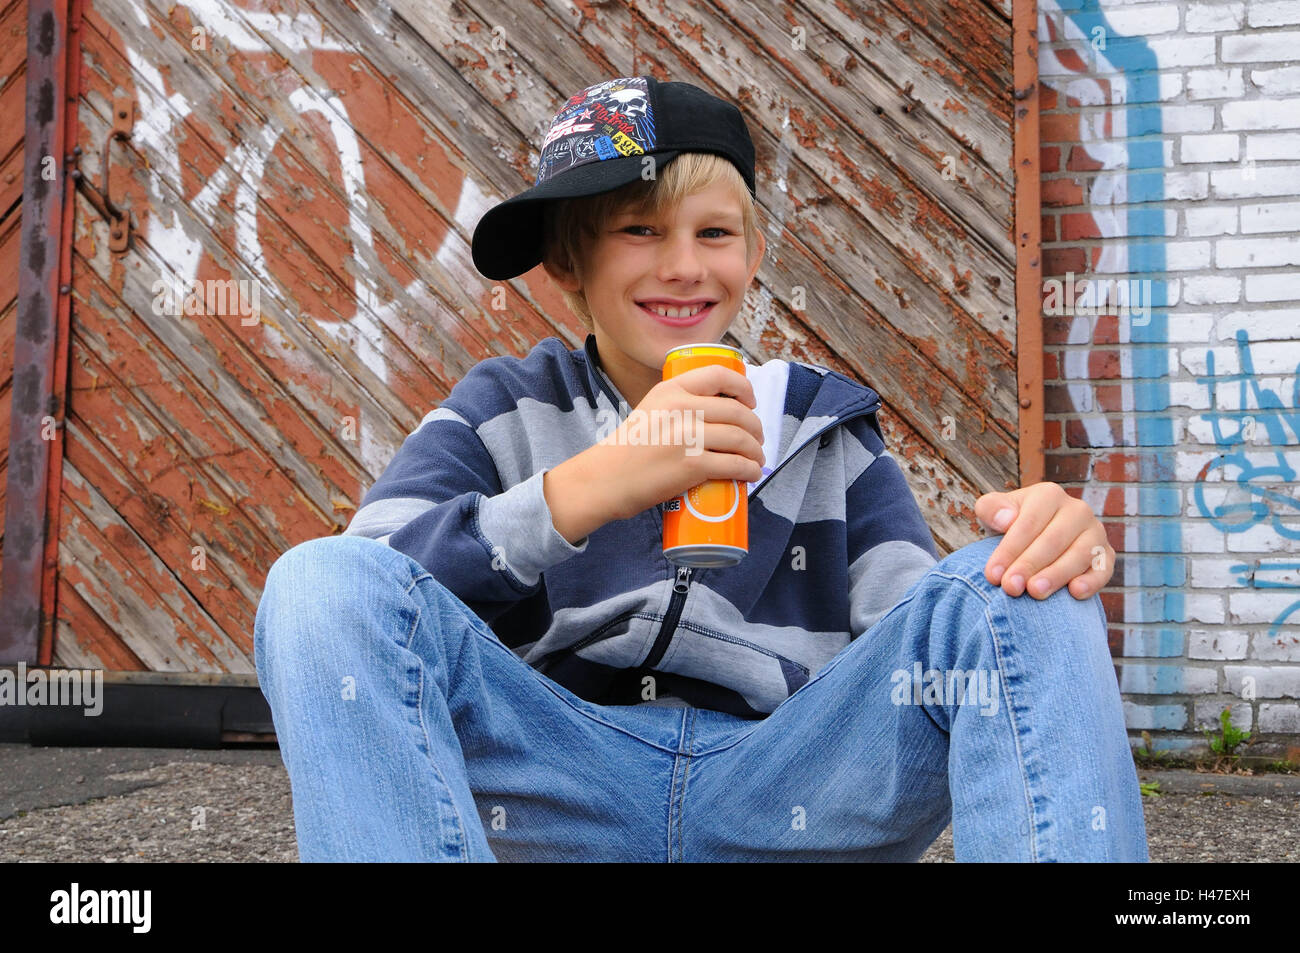 Boy, baseball cap, drinks can, sit, smile, view camera, kids, young persons, playing skat, skaters, cap, break, happy, smile, drink lighthearted, childhood, youth, cap, outfit, careless, youth culture, cleverly, mischievously, industrial scales, leisure t Stock Photo